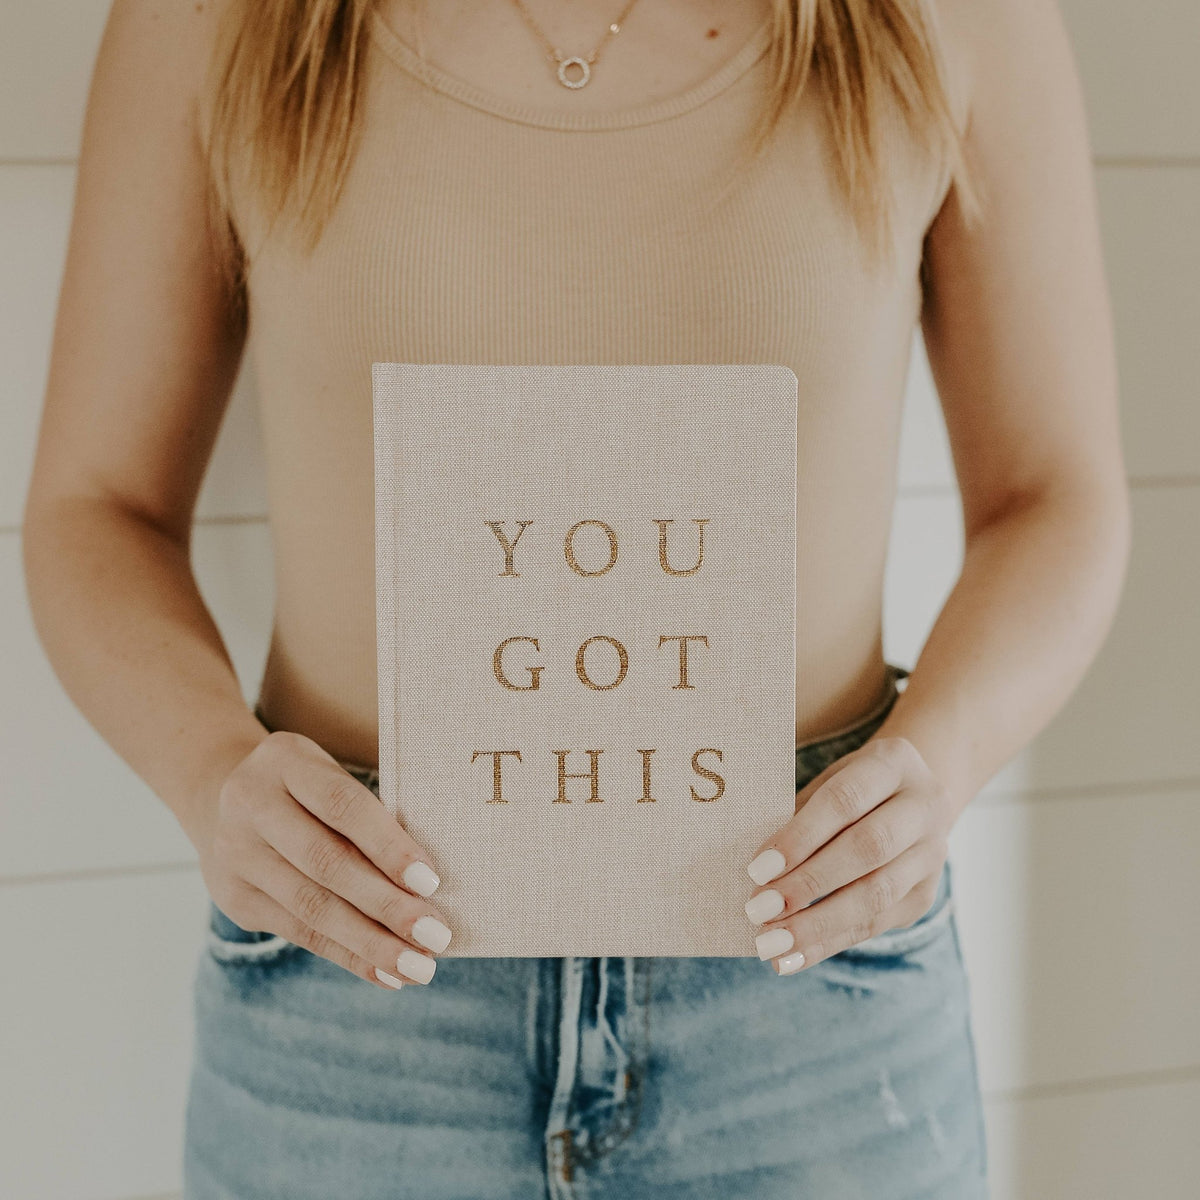 You Got This - Tan and Gold Foil Fabric Journal - Olivia Macaron